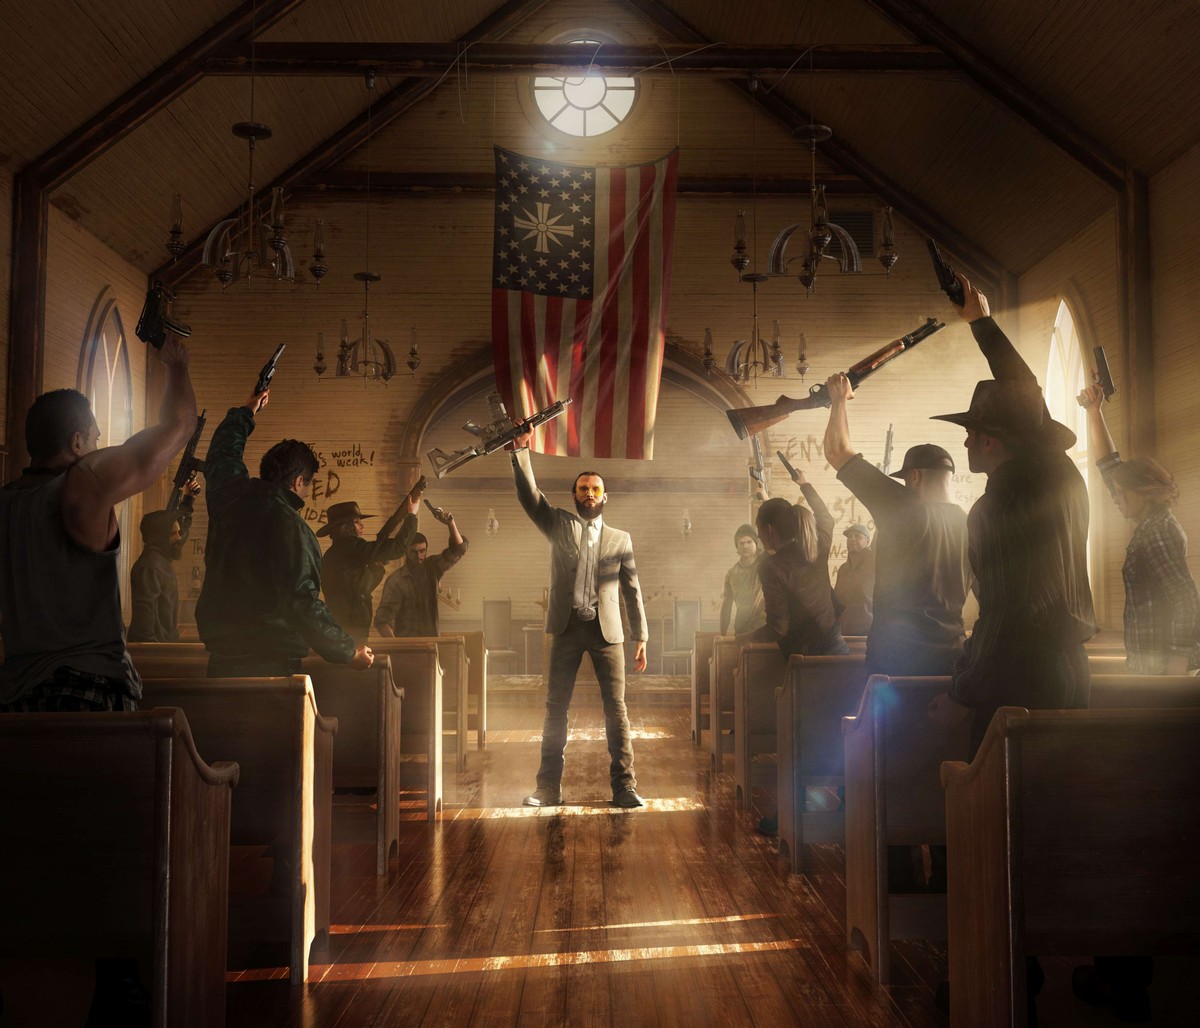 Far Cry 5 the number 2 best selling steam games 2018